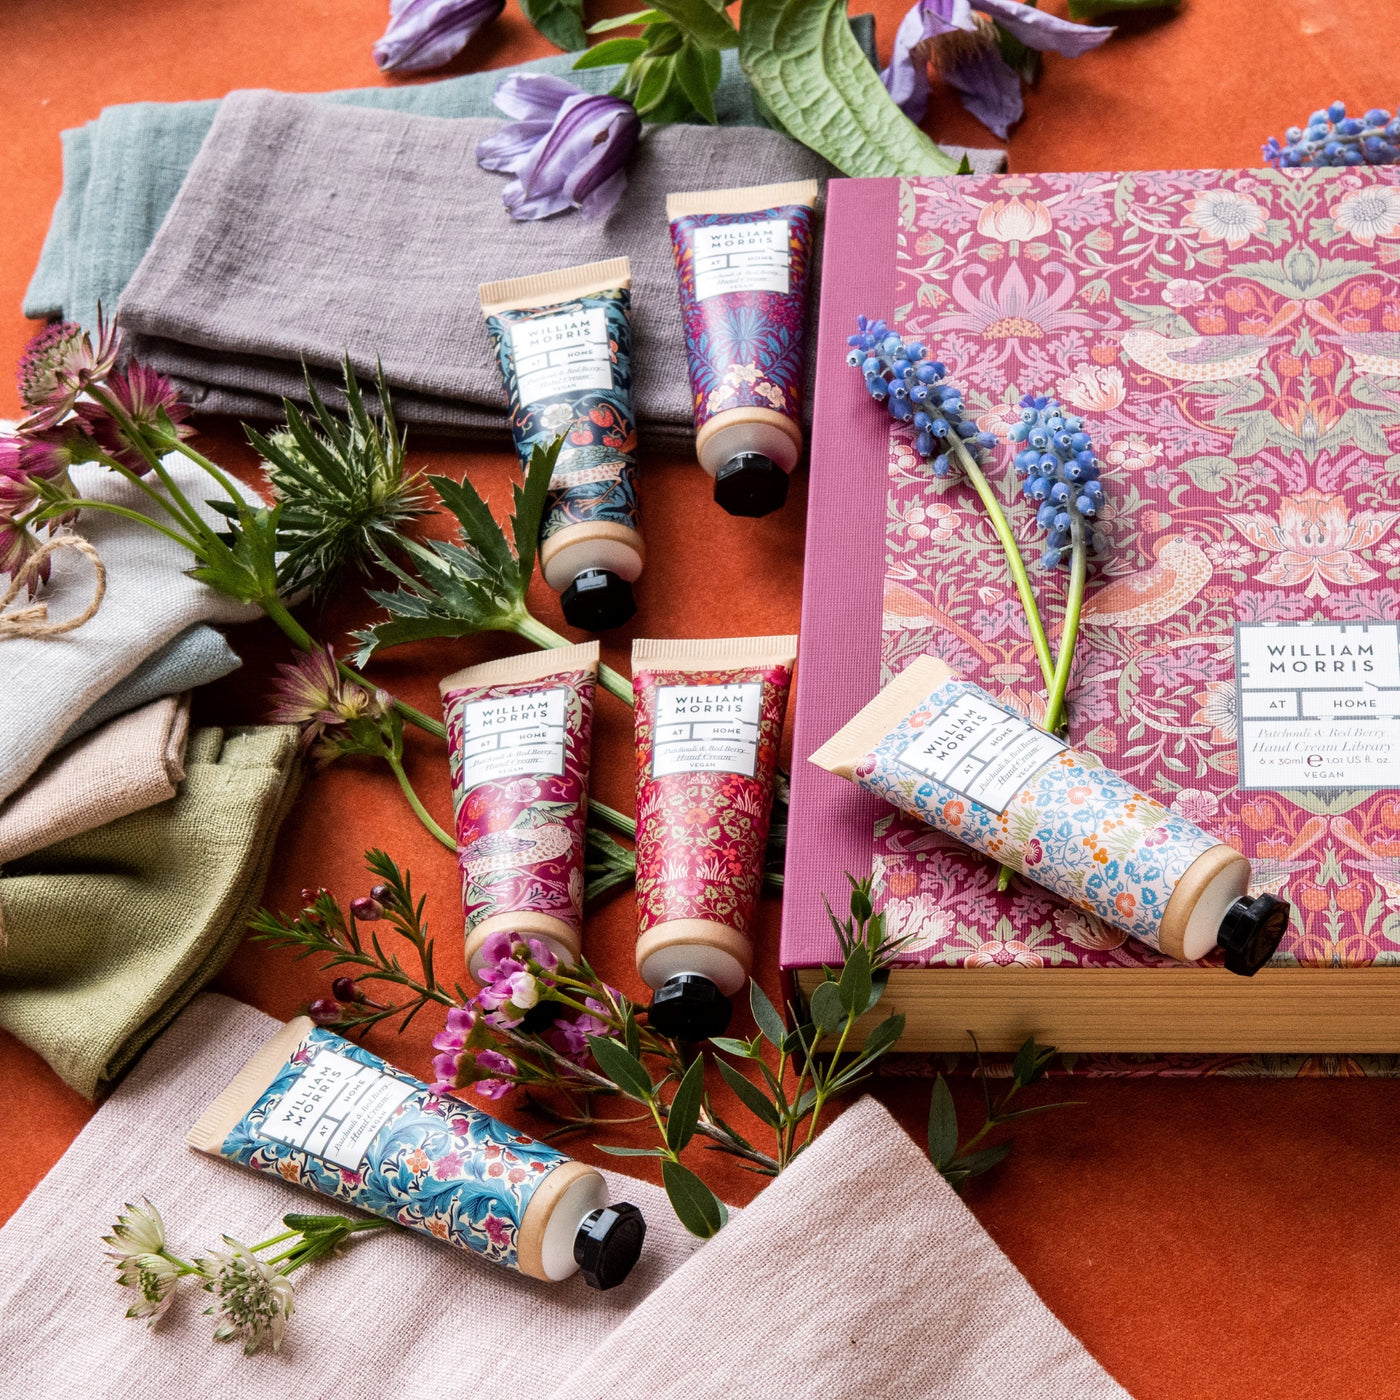 Strawberry Thief Patchouli & Red Berry Hand Cream Library